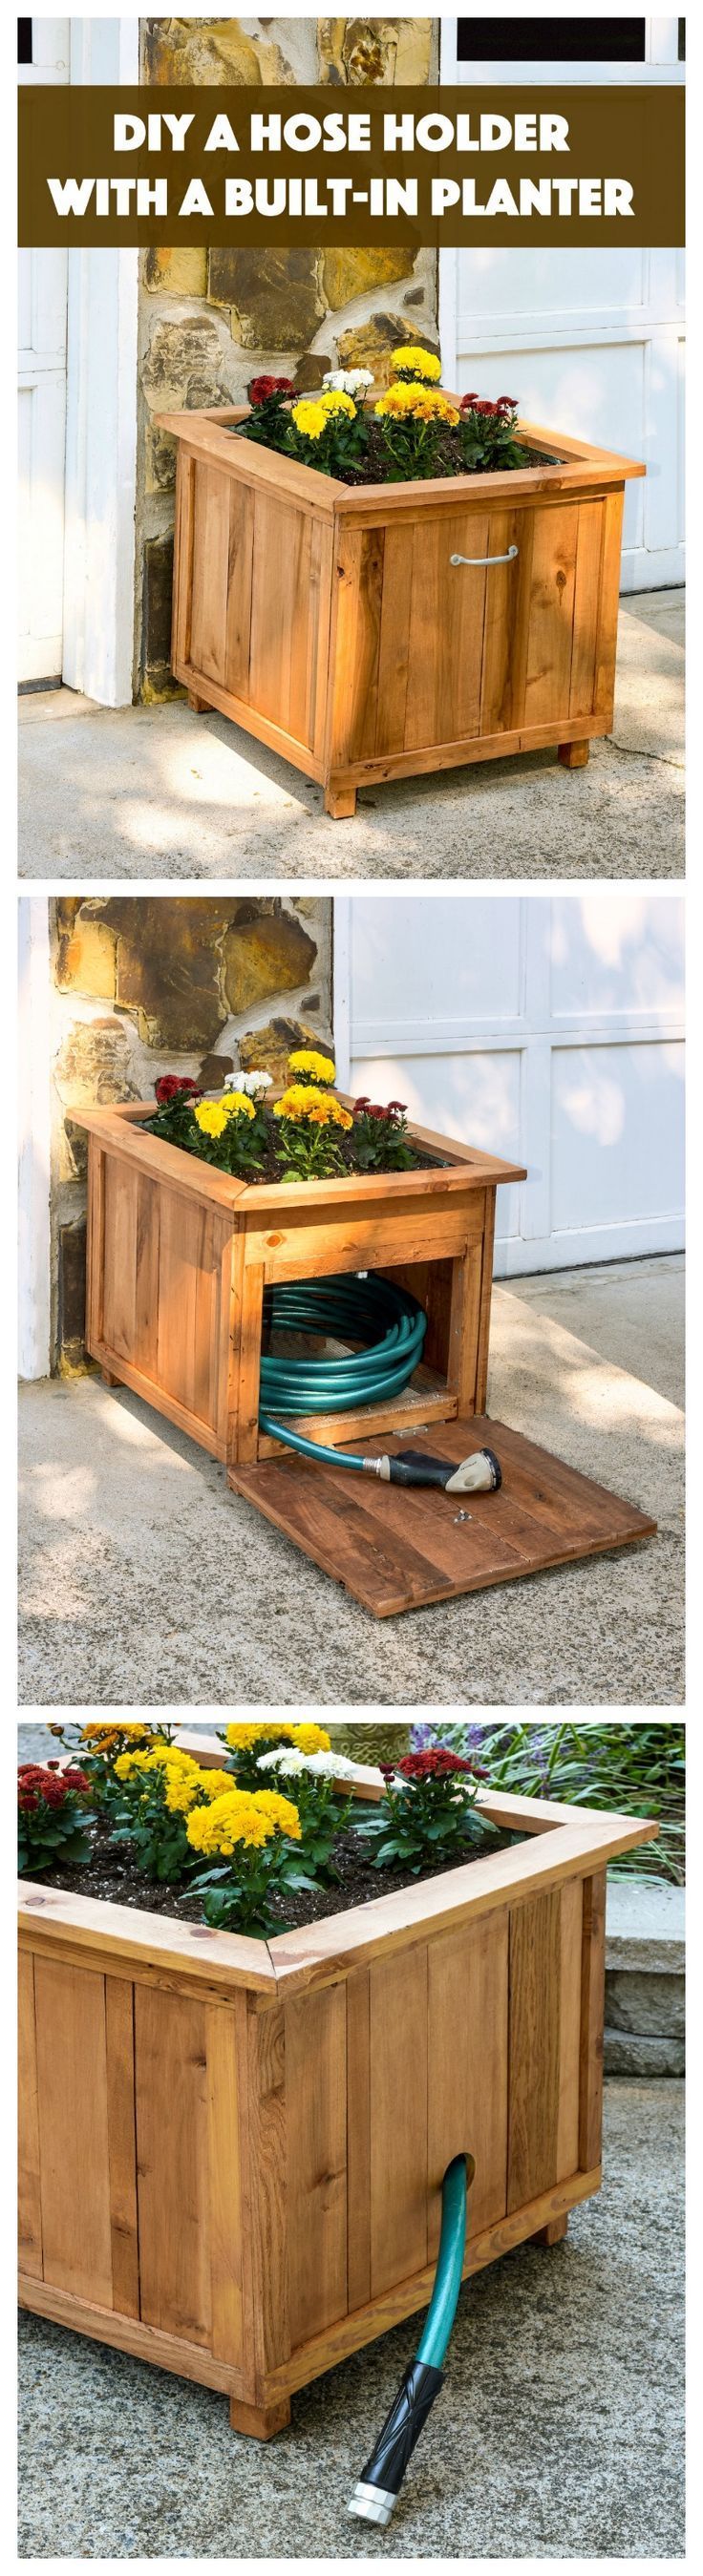 Build a unique hose holder using recycled pallet wood! This holder has a special feature; you can plan